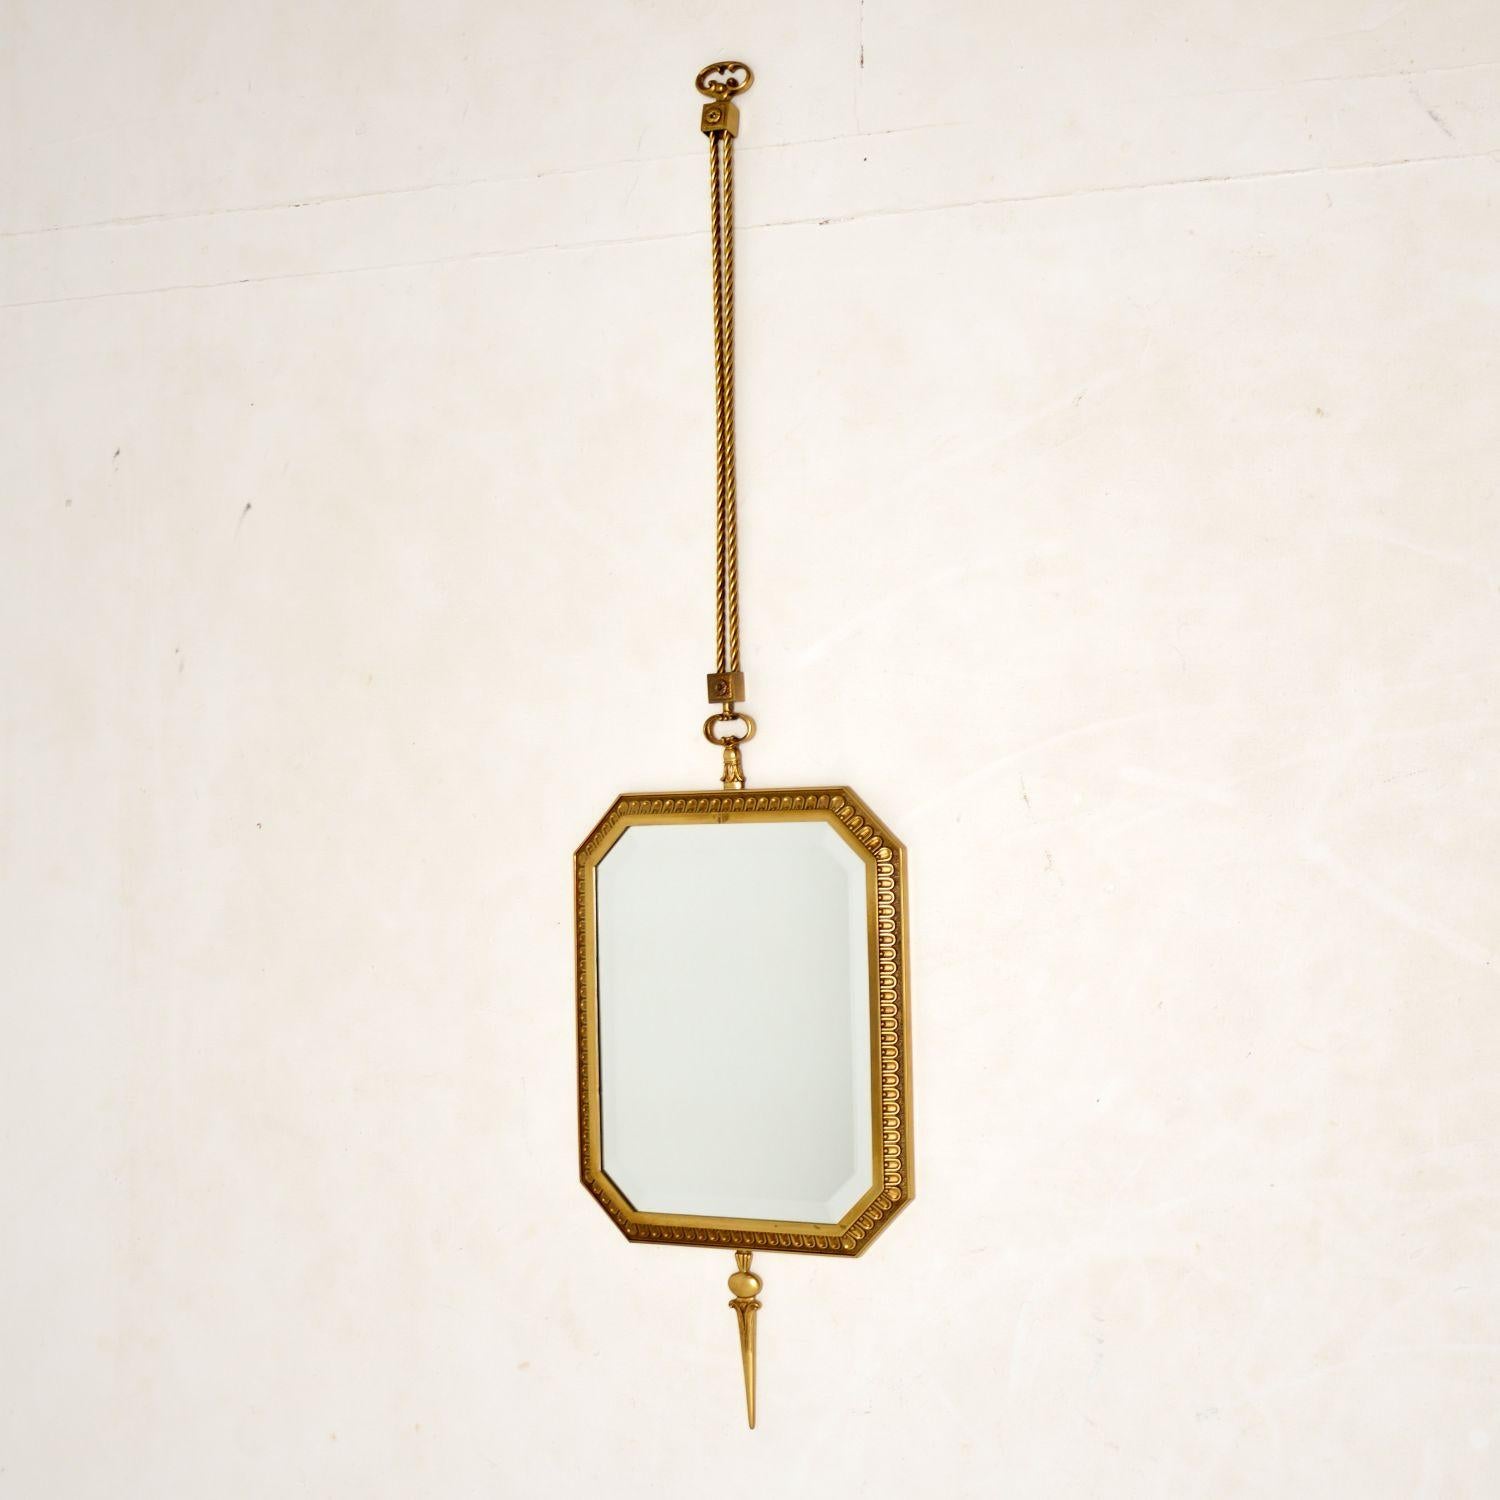 A stunning vintage pendant mirror in solid brass. This is in the antique French style & I would date it from the 1950’s period.

It is of wonderful quality, the brass frame has beautiful detail and hangs by solid brass double rope twists. The